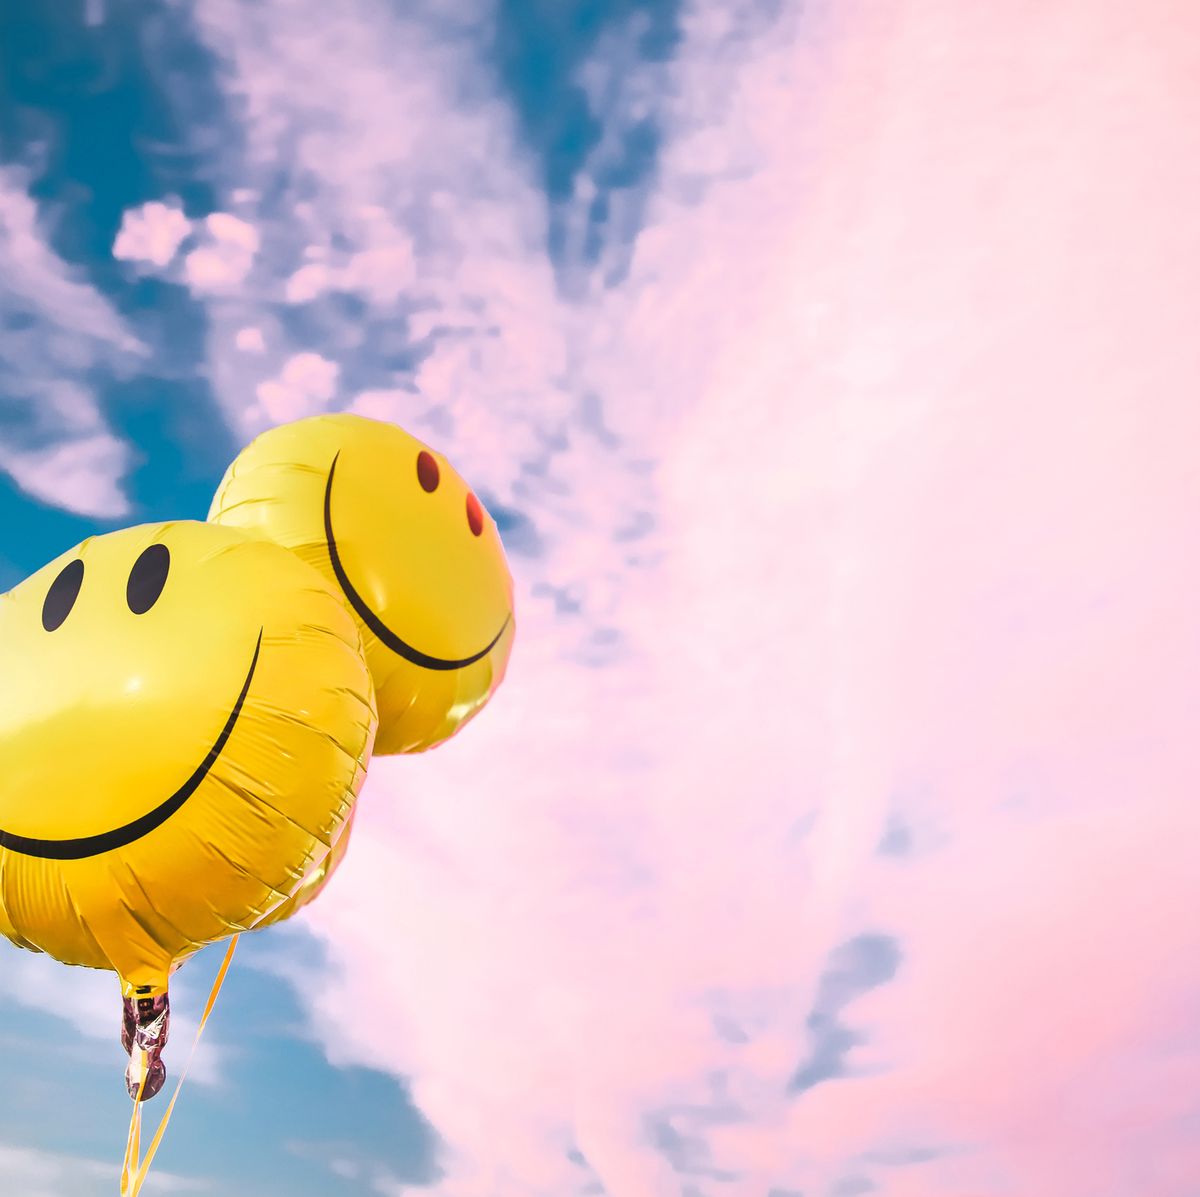 The Power of Happiness: What Makes You happy?